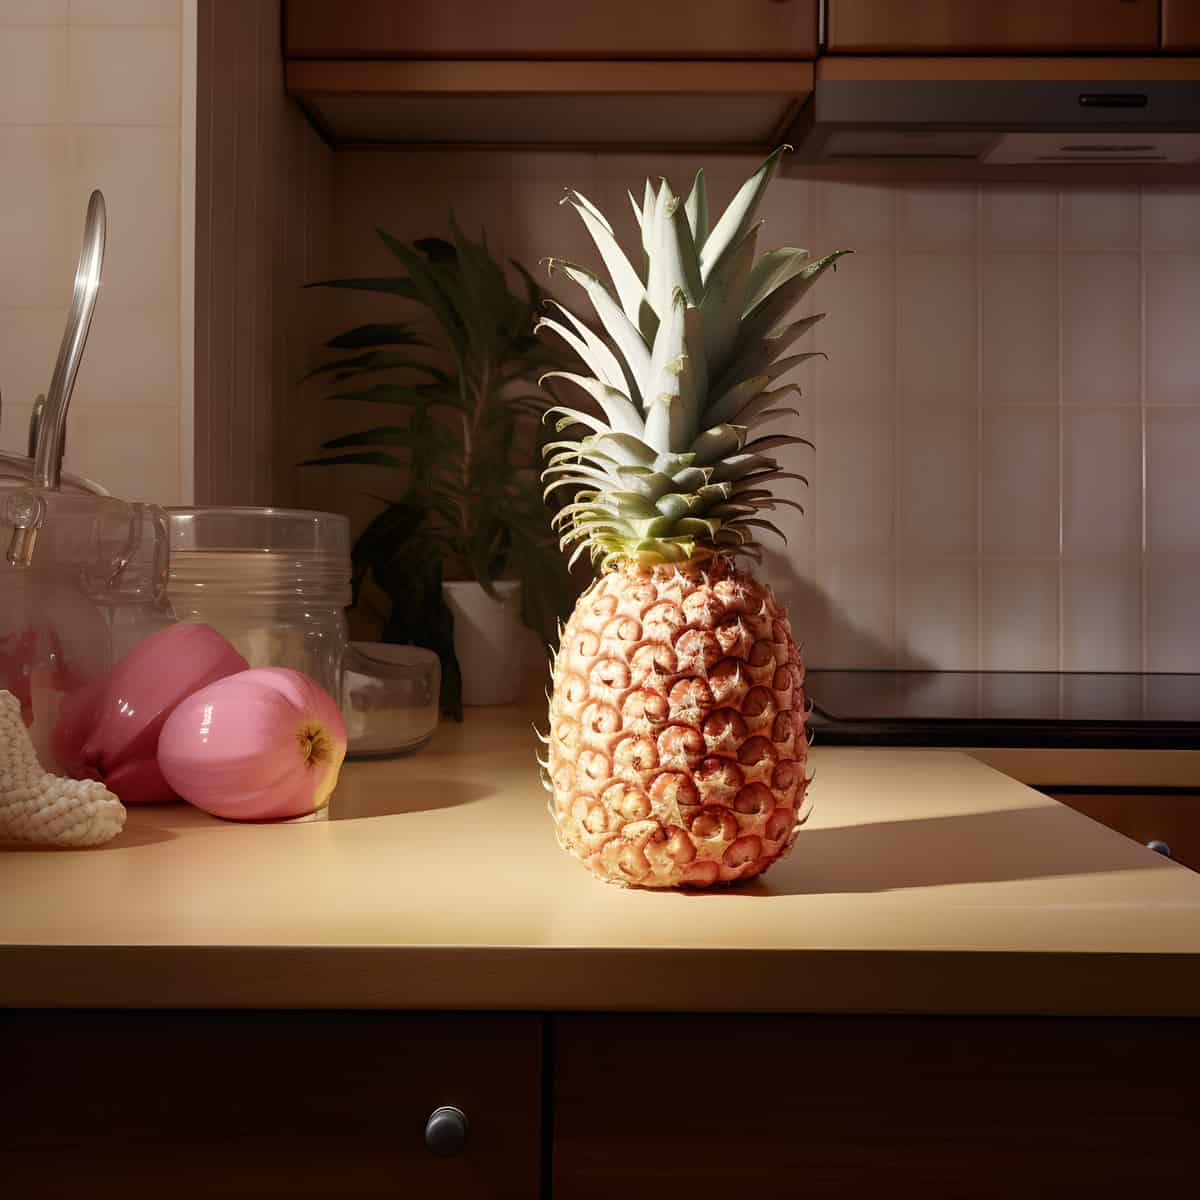 Pinkglow Pineapple on a kitchen counter